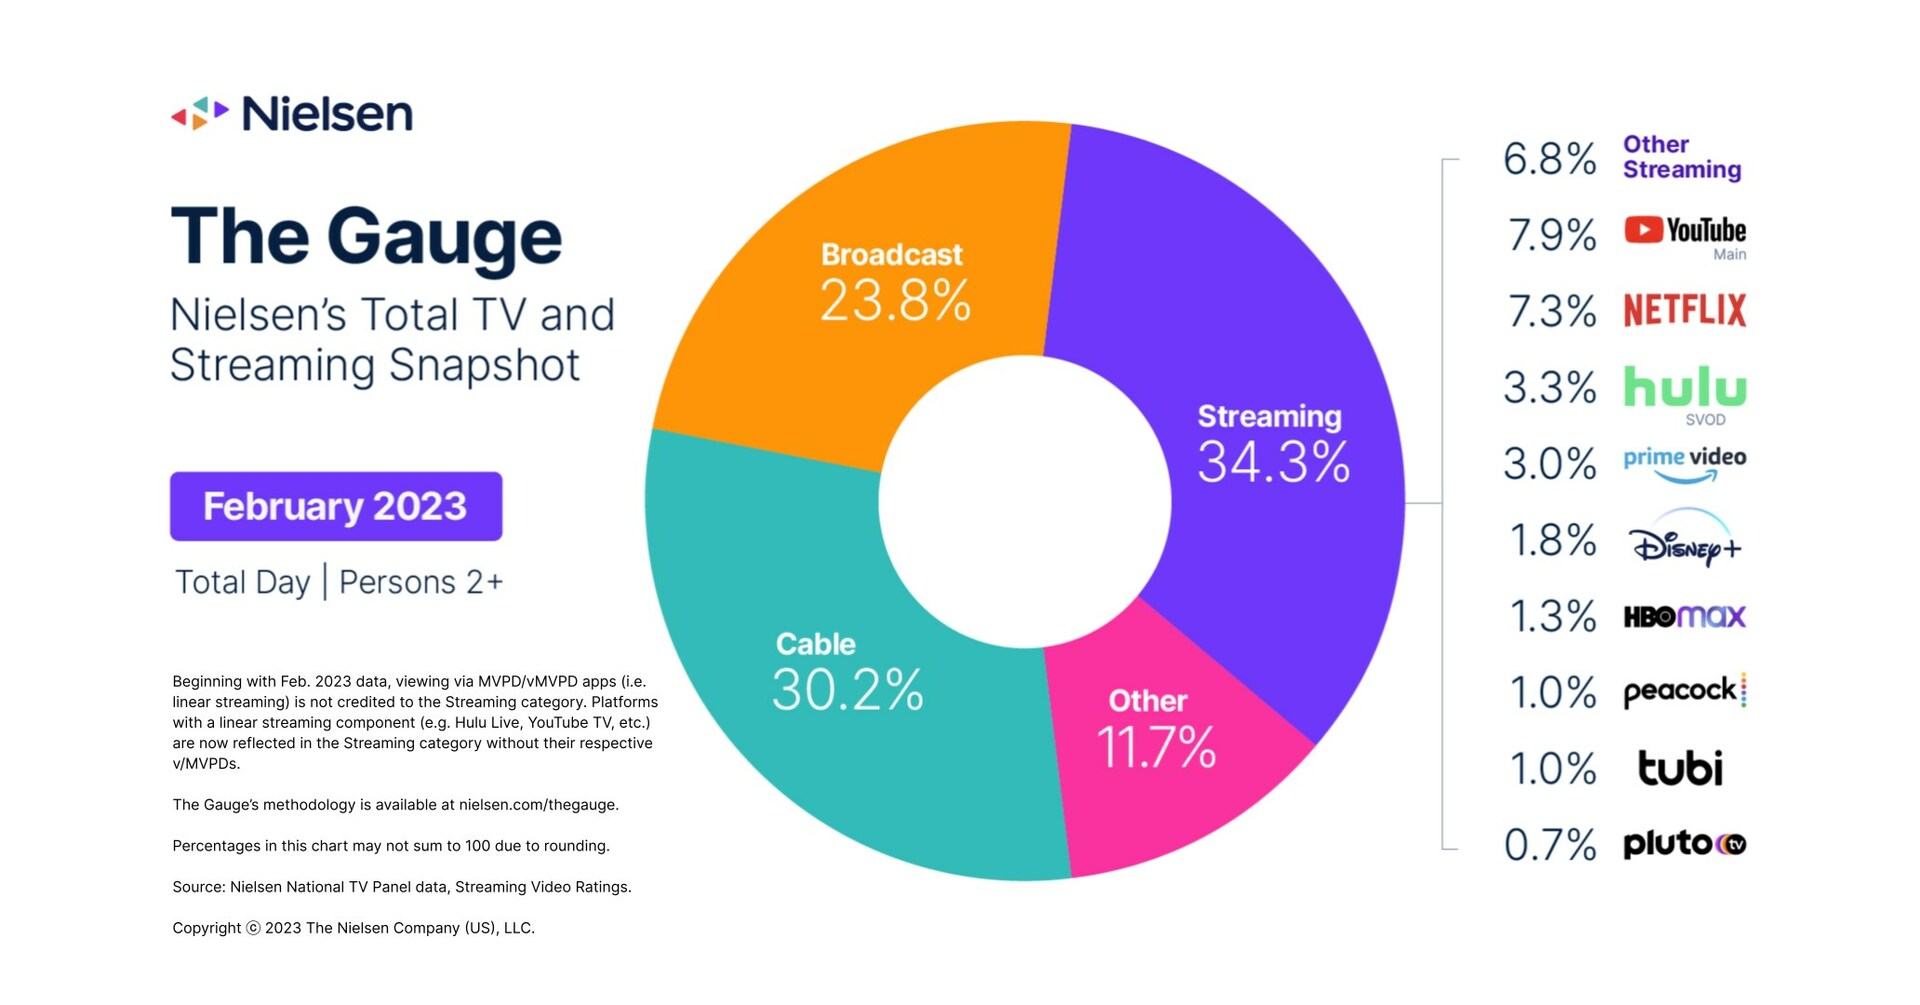 February Exhibits Seasonality of TV Usage, but Streaming Continues to Make Waves, according to Nielsen’s The Gauge